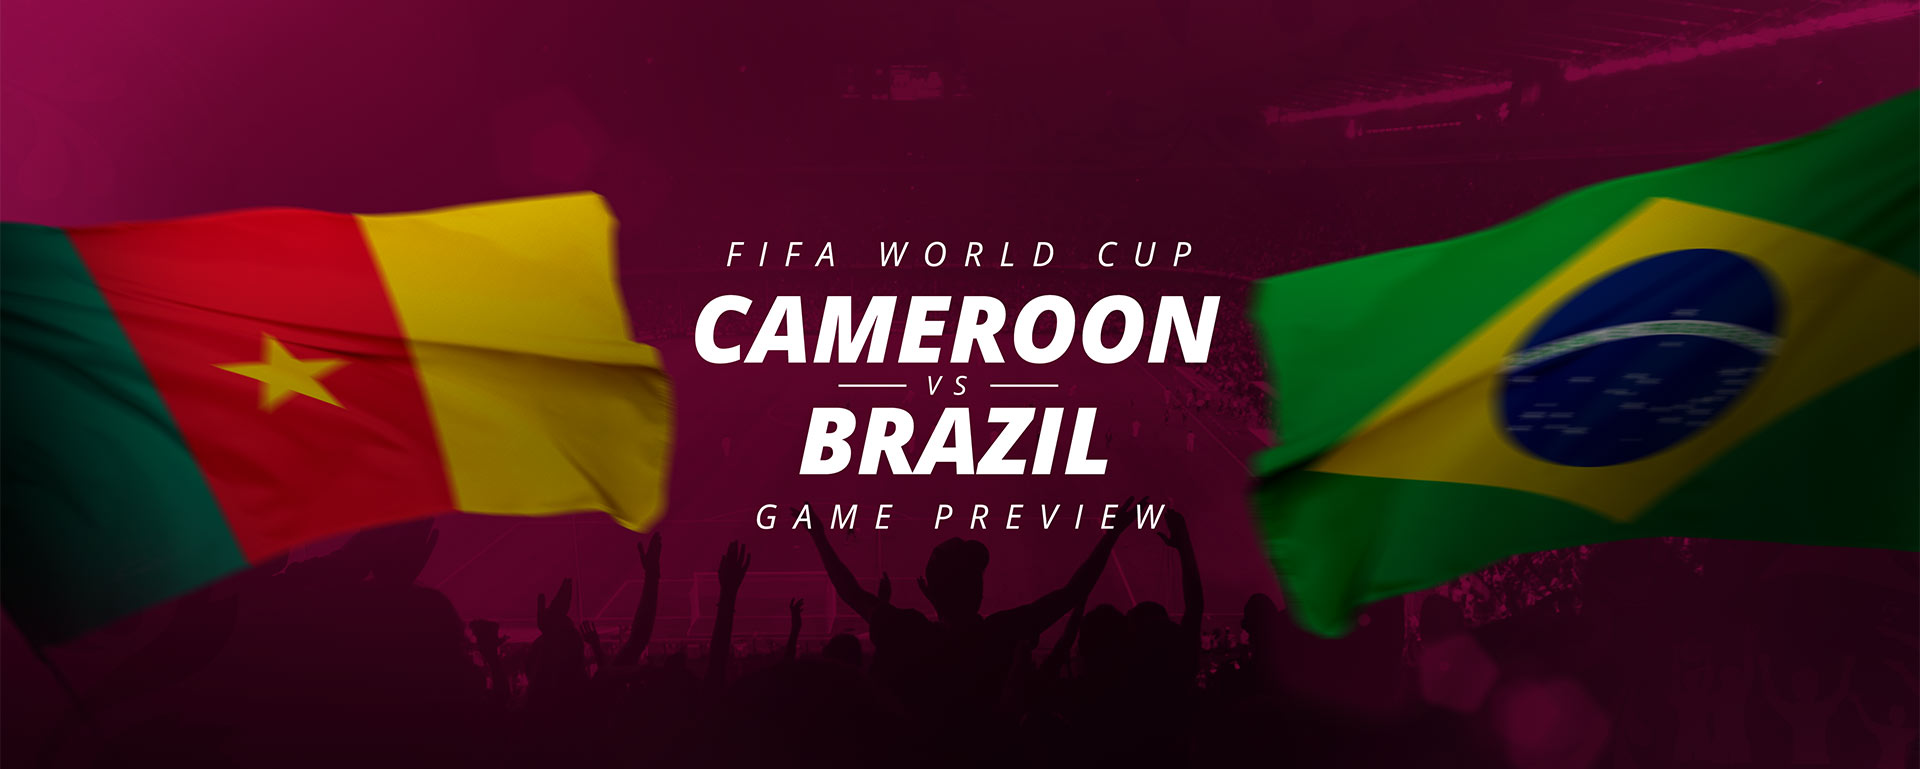 FIFA WORLD CUP: CAMEROON V BRAZIL – GAME PREVIEW